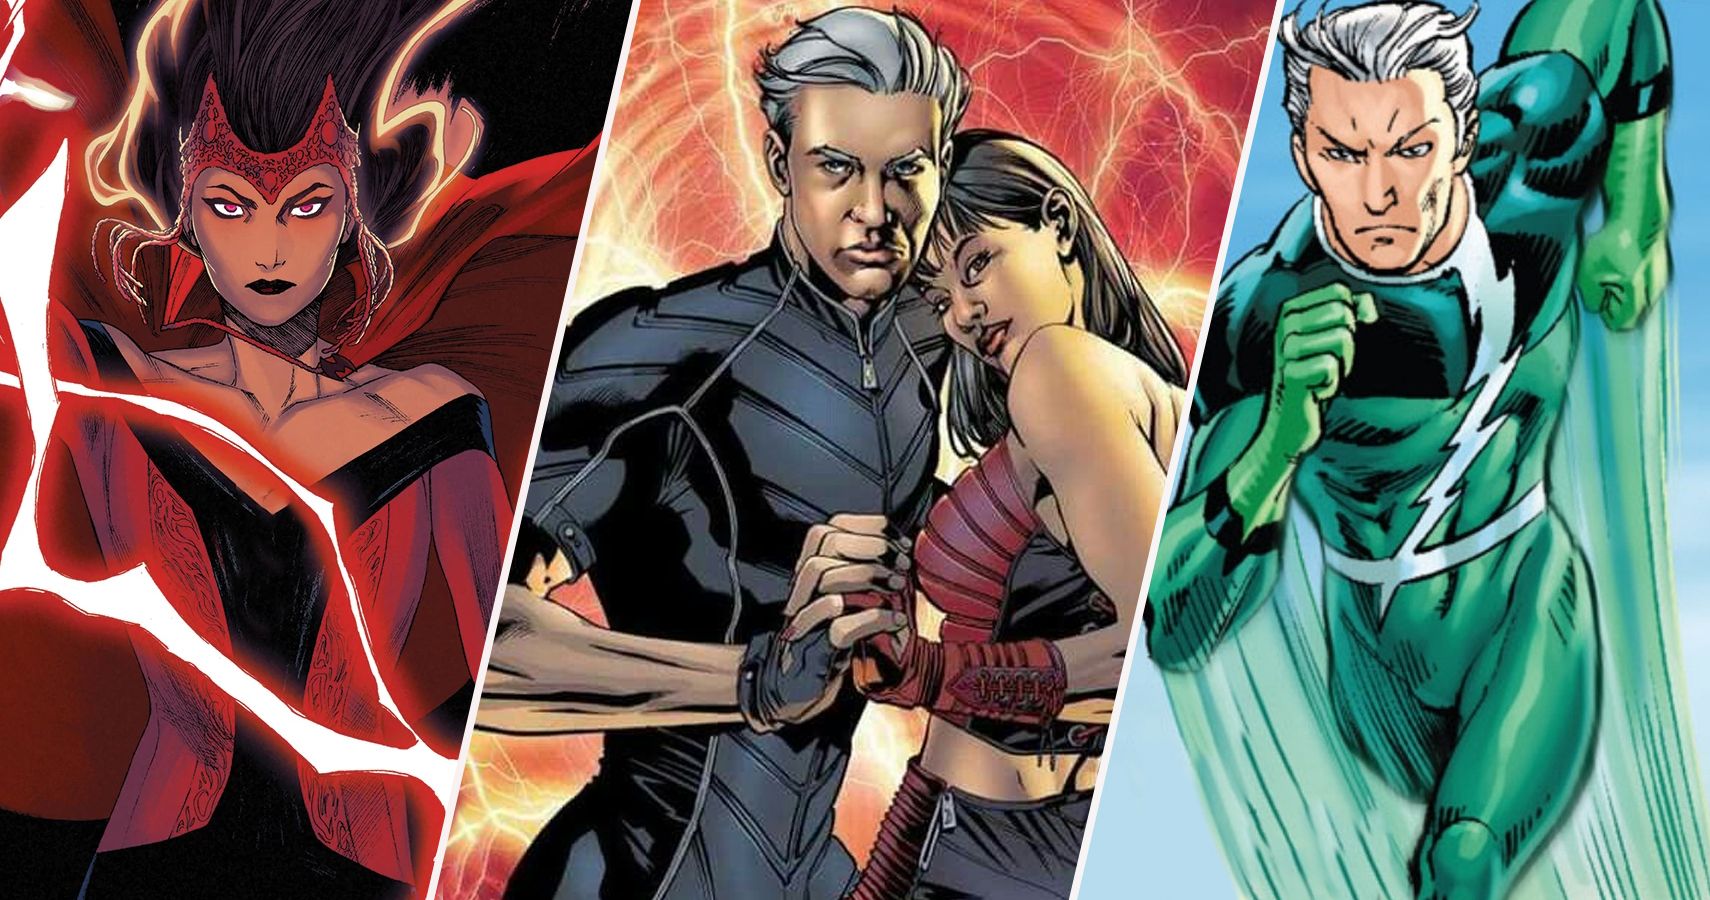 Scarlet Witch's Worst Romance Was With Her Brother, Quicksilver